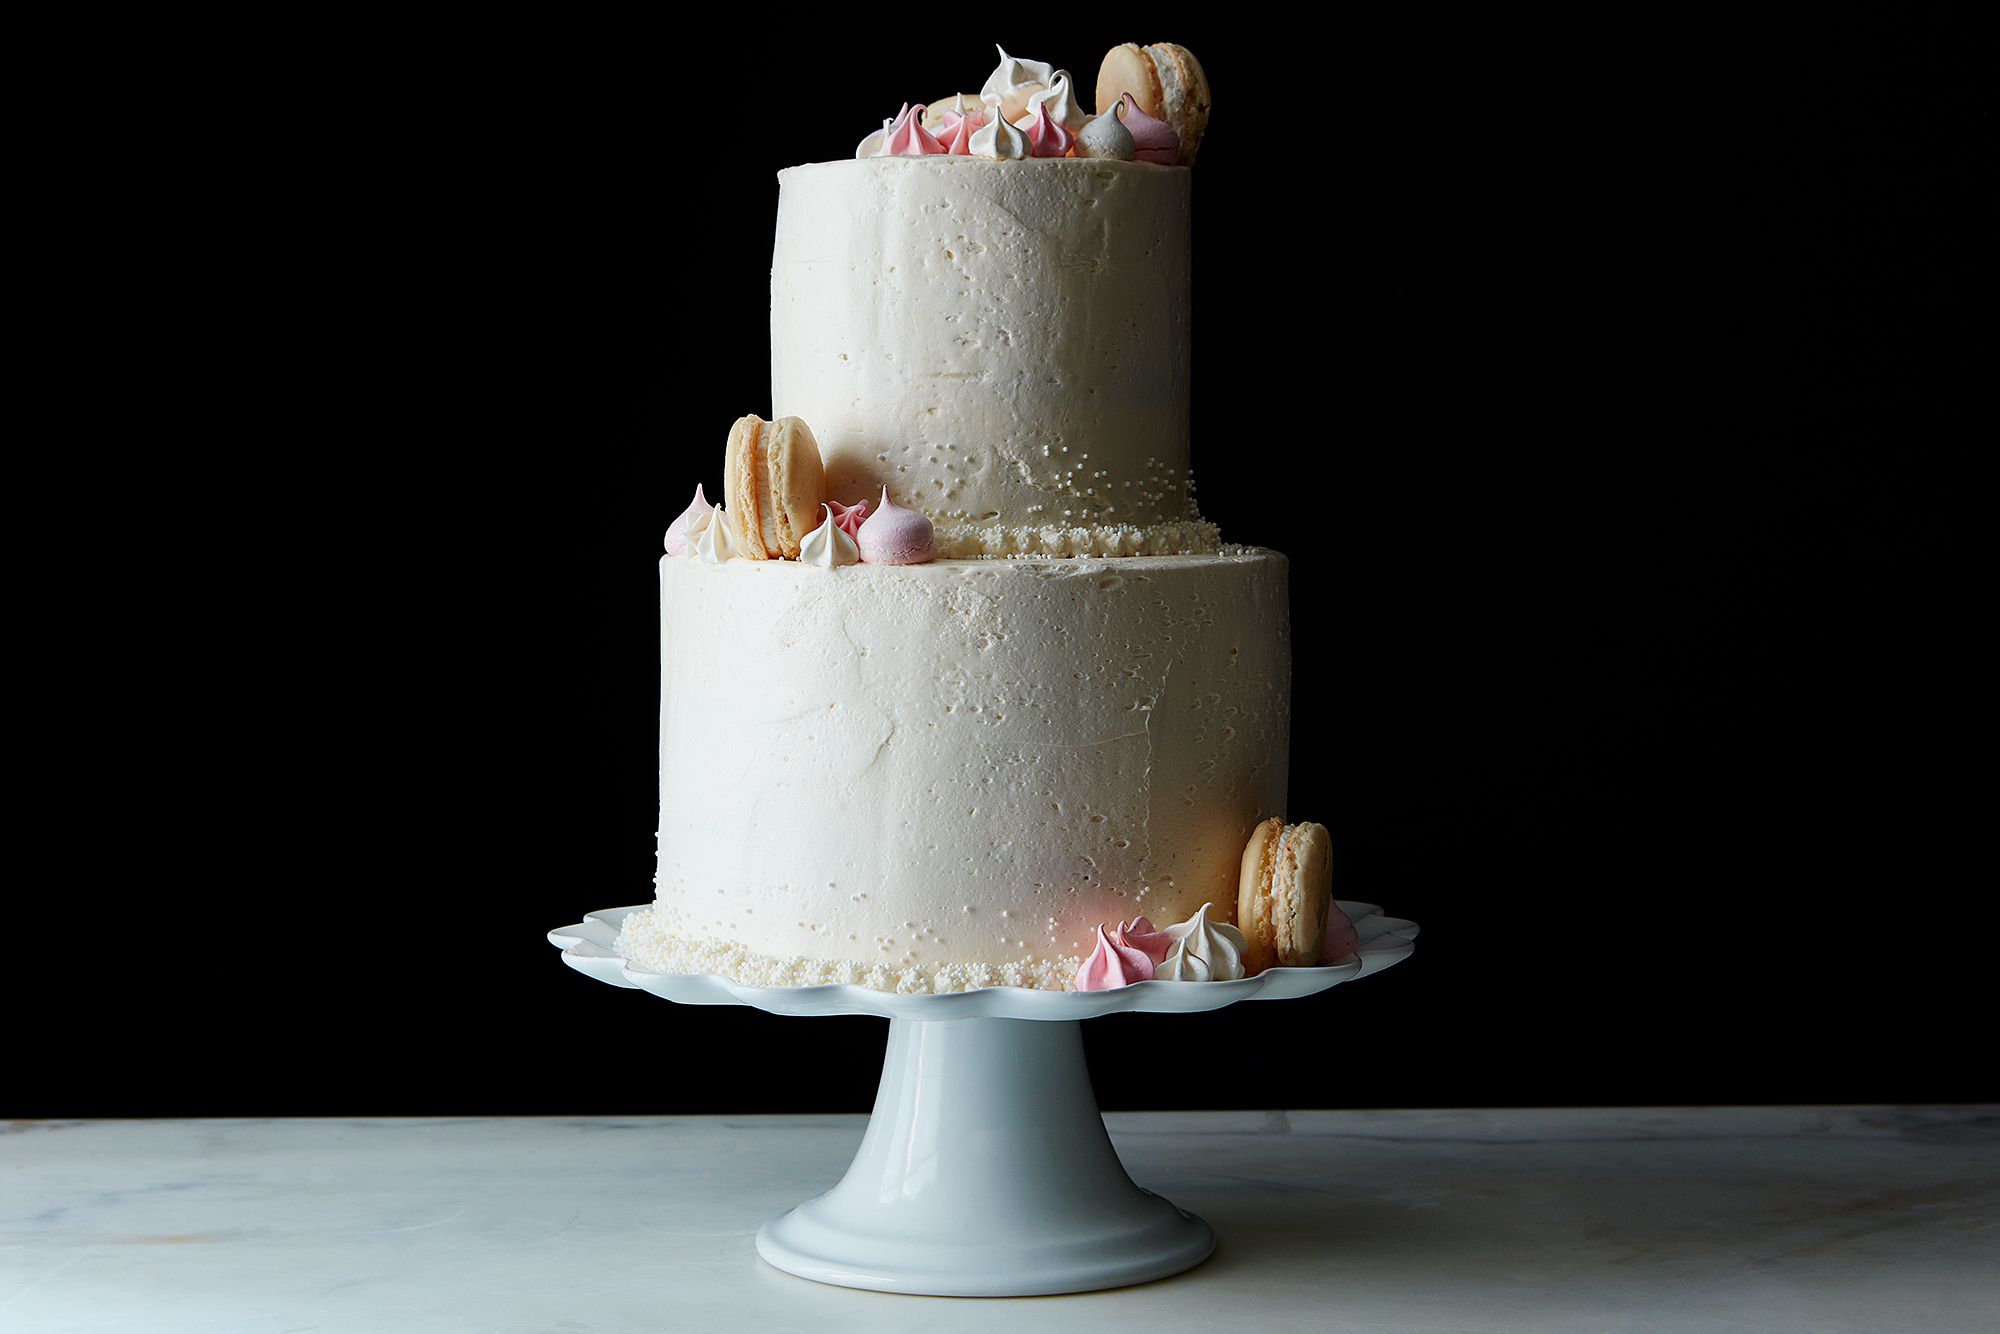 5 Easy Wedding Cake Decorations You Can Do Yourself